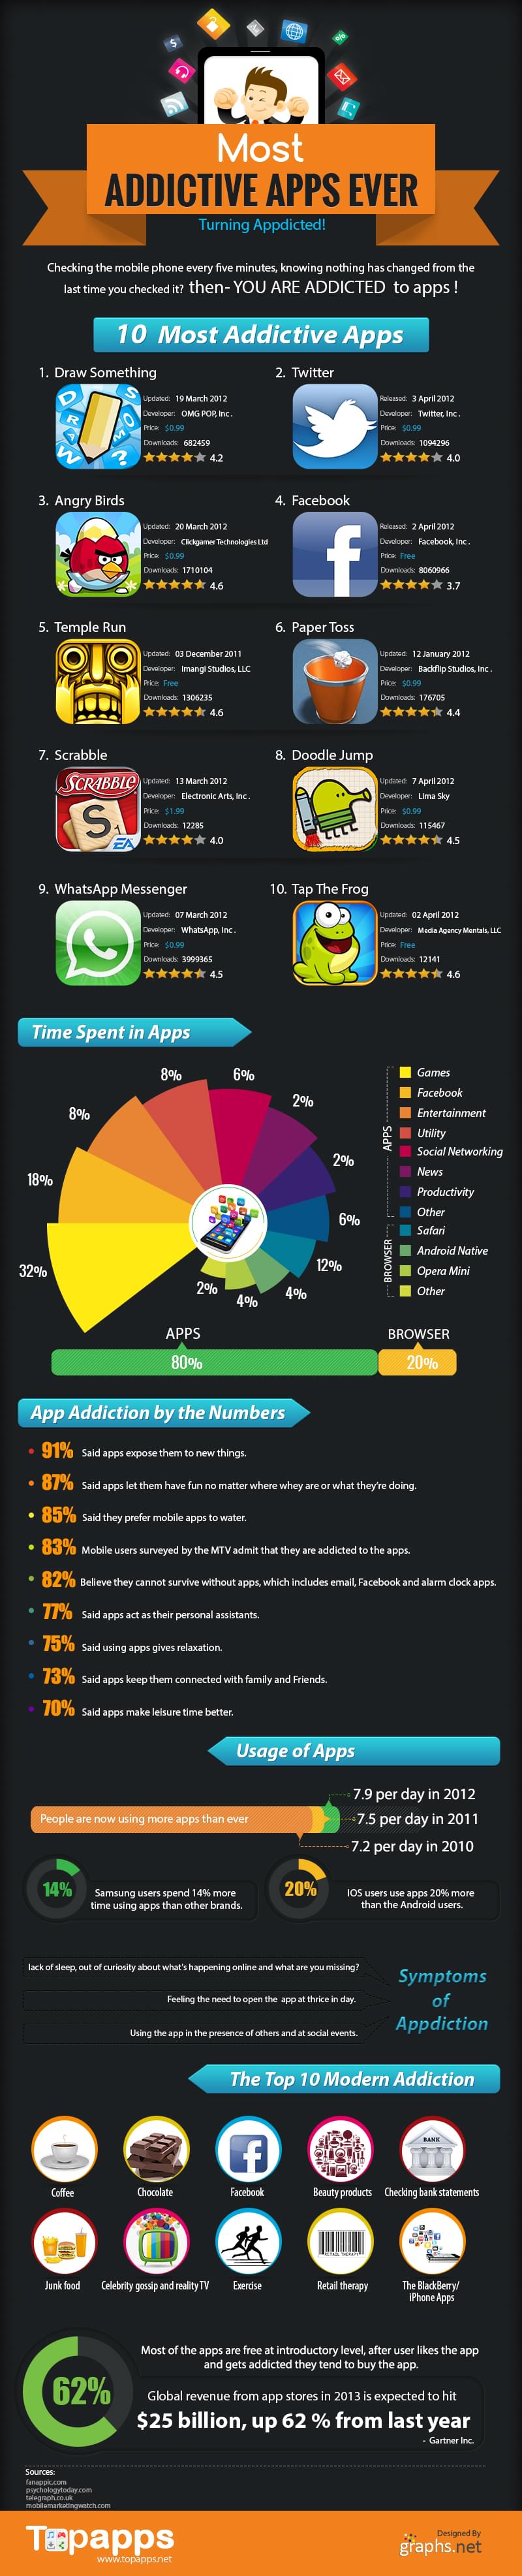 How Popular Is the Game Temple Run? [Infographic]